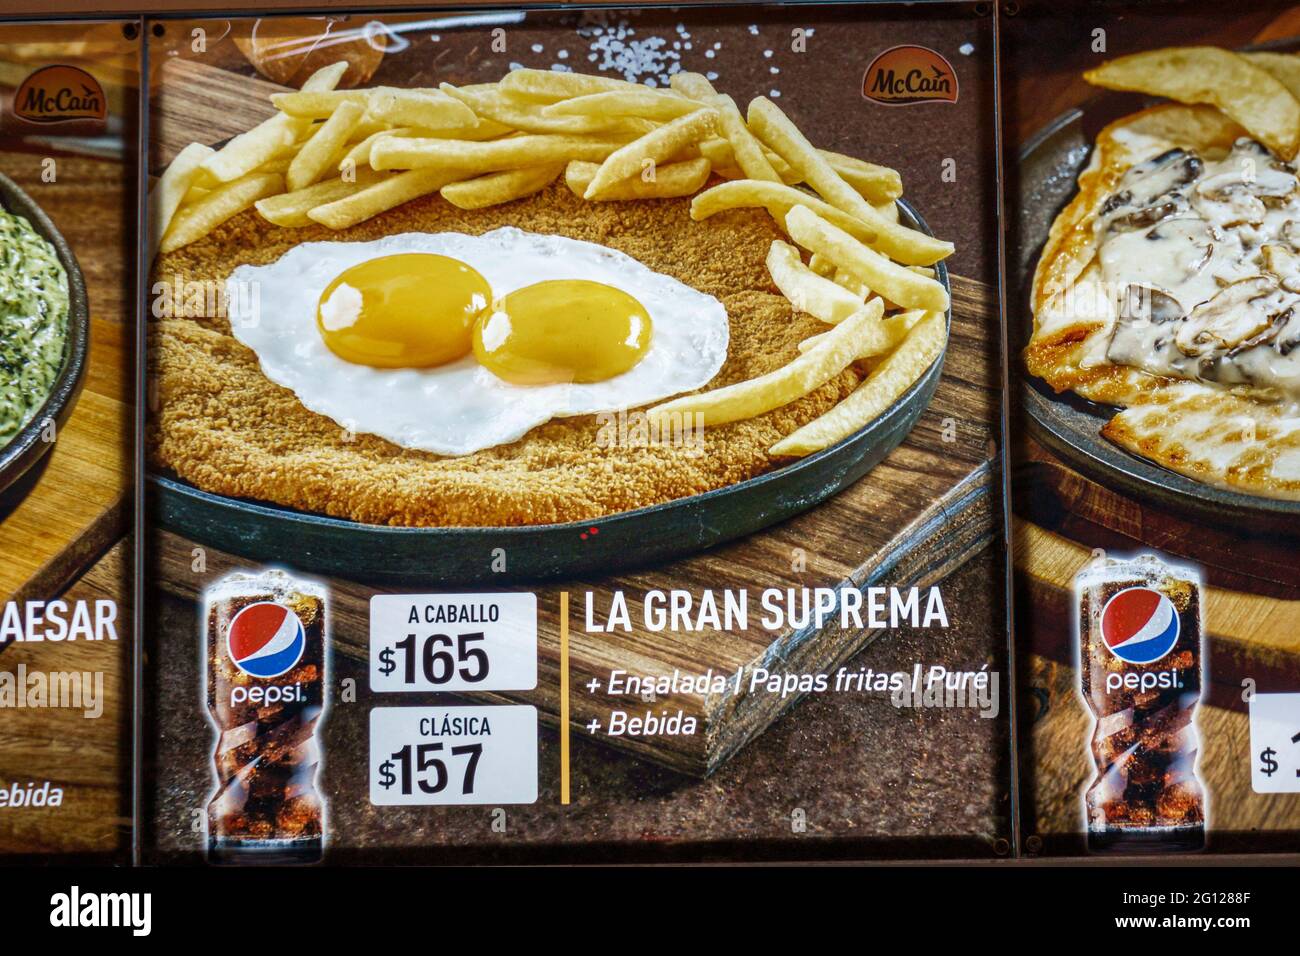 Argentina Buenos Aires restaurant photo menu typical food Pepsi marketing Spanish language fried food eggs French fries Milanesa a Caballo chicken fri Stock Photo